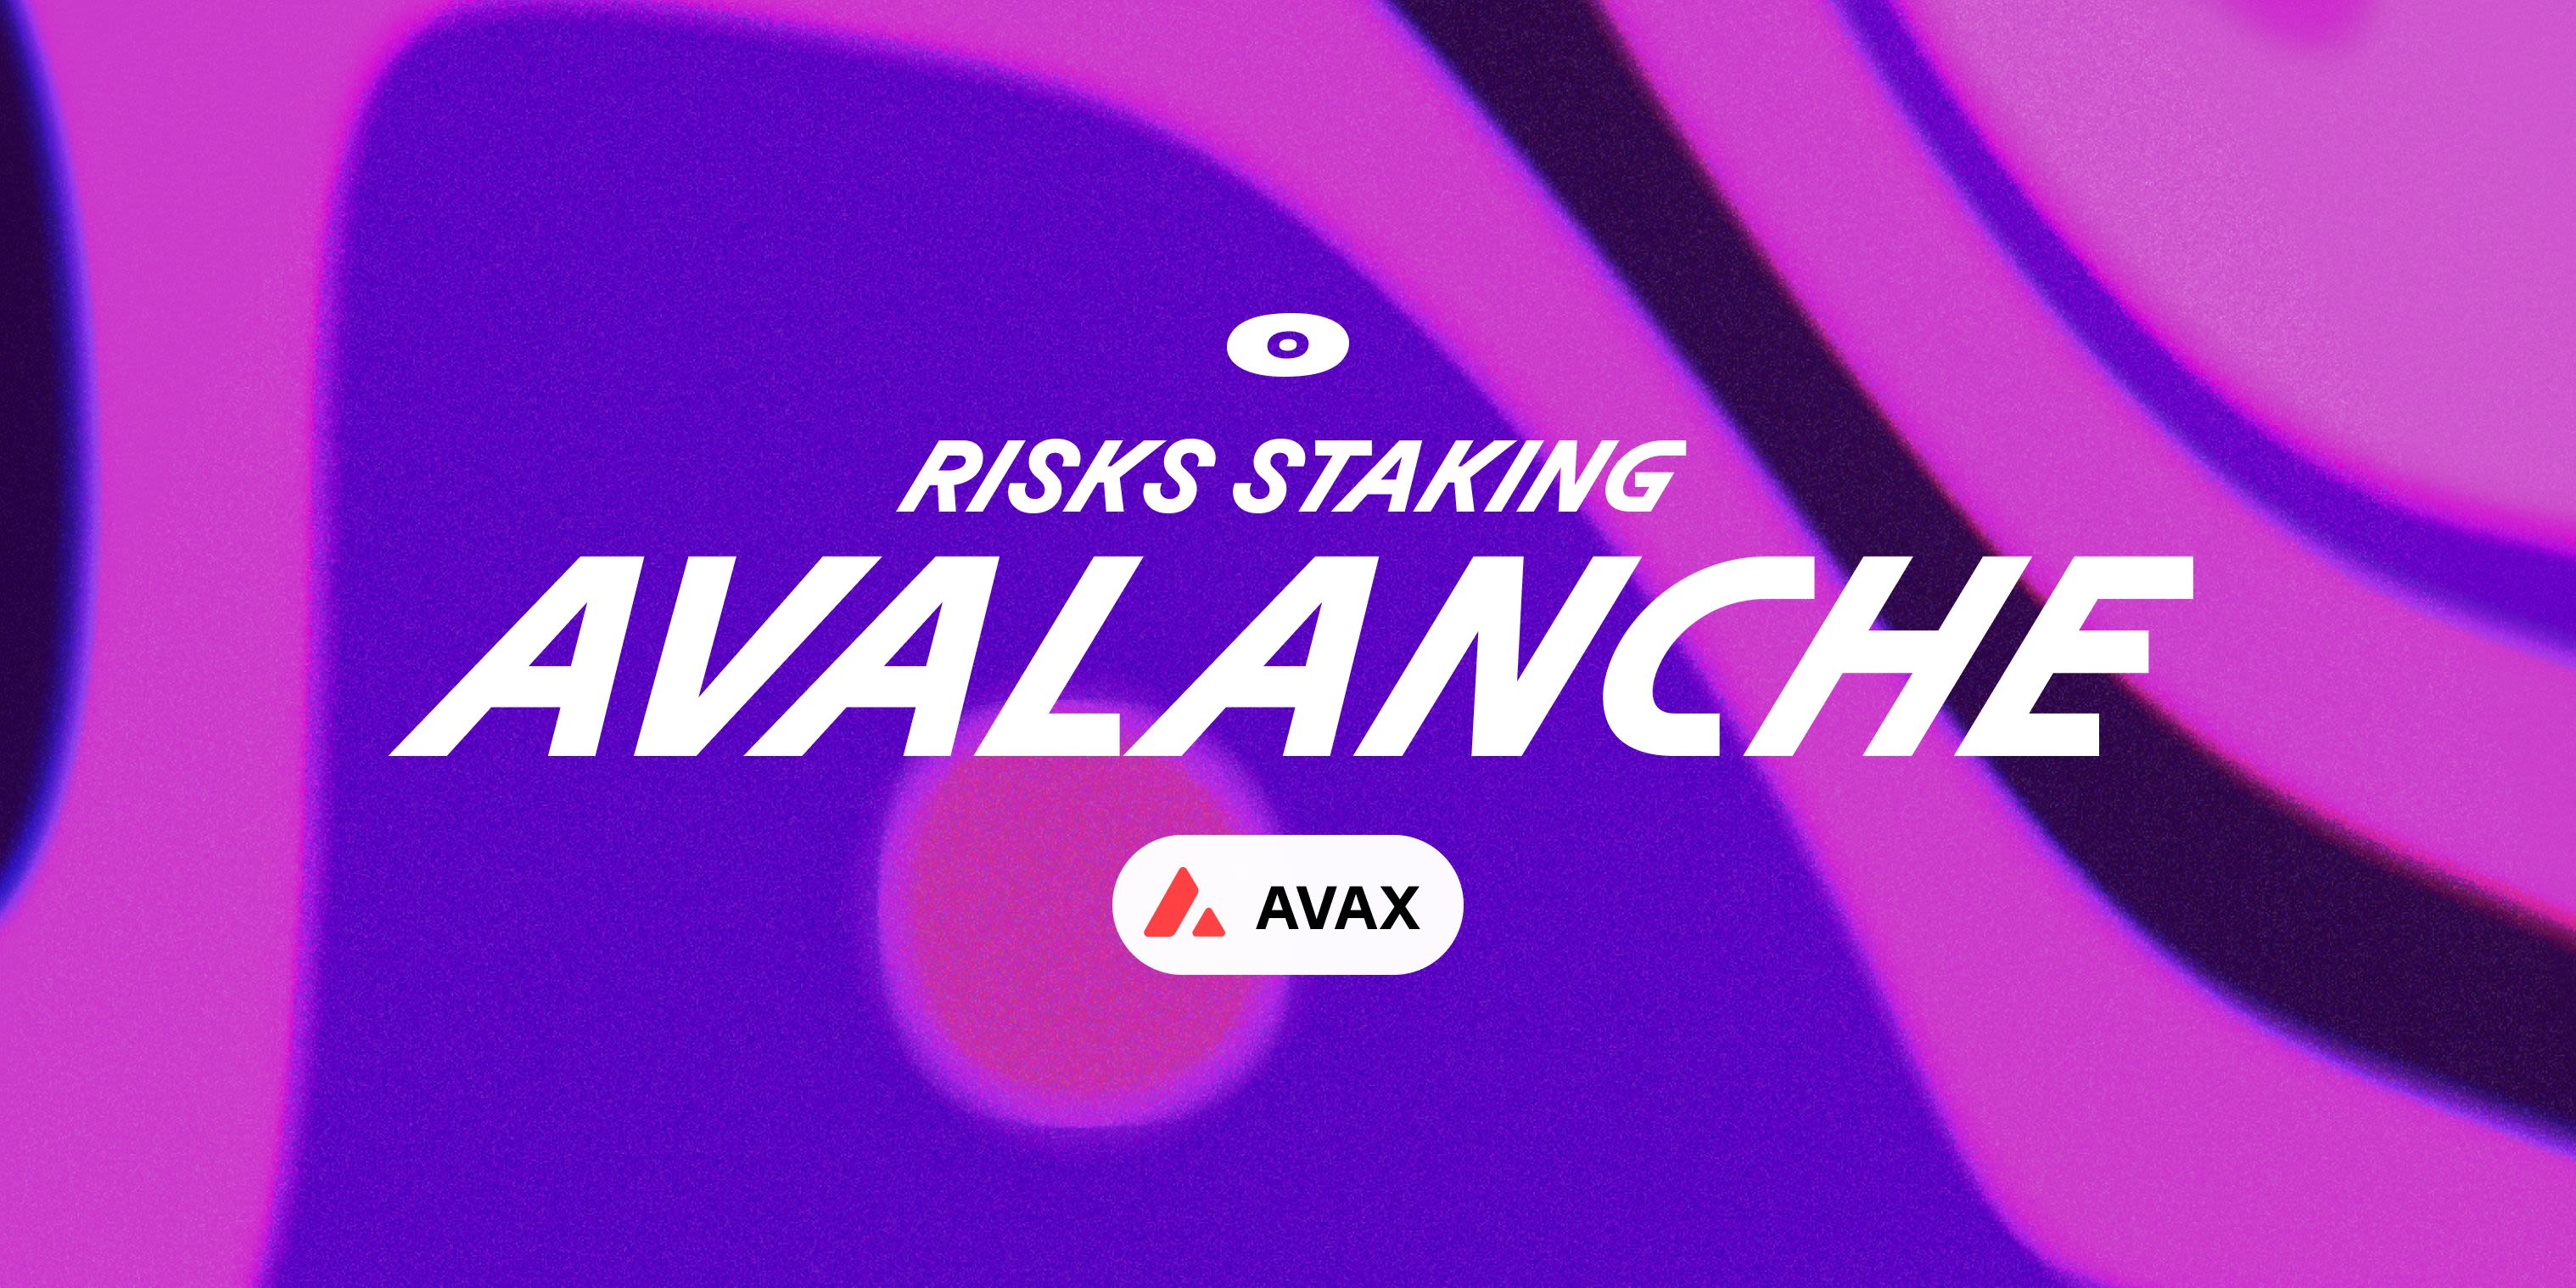 Cover Image for Risks of staking AVAX